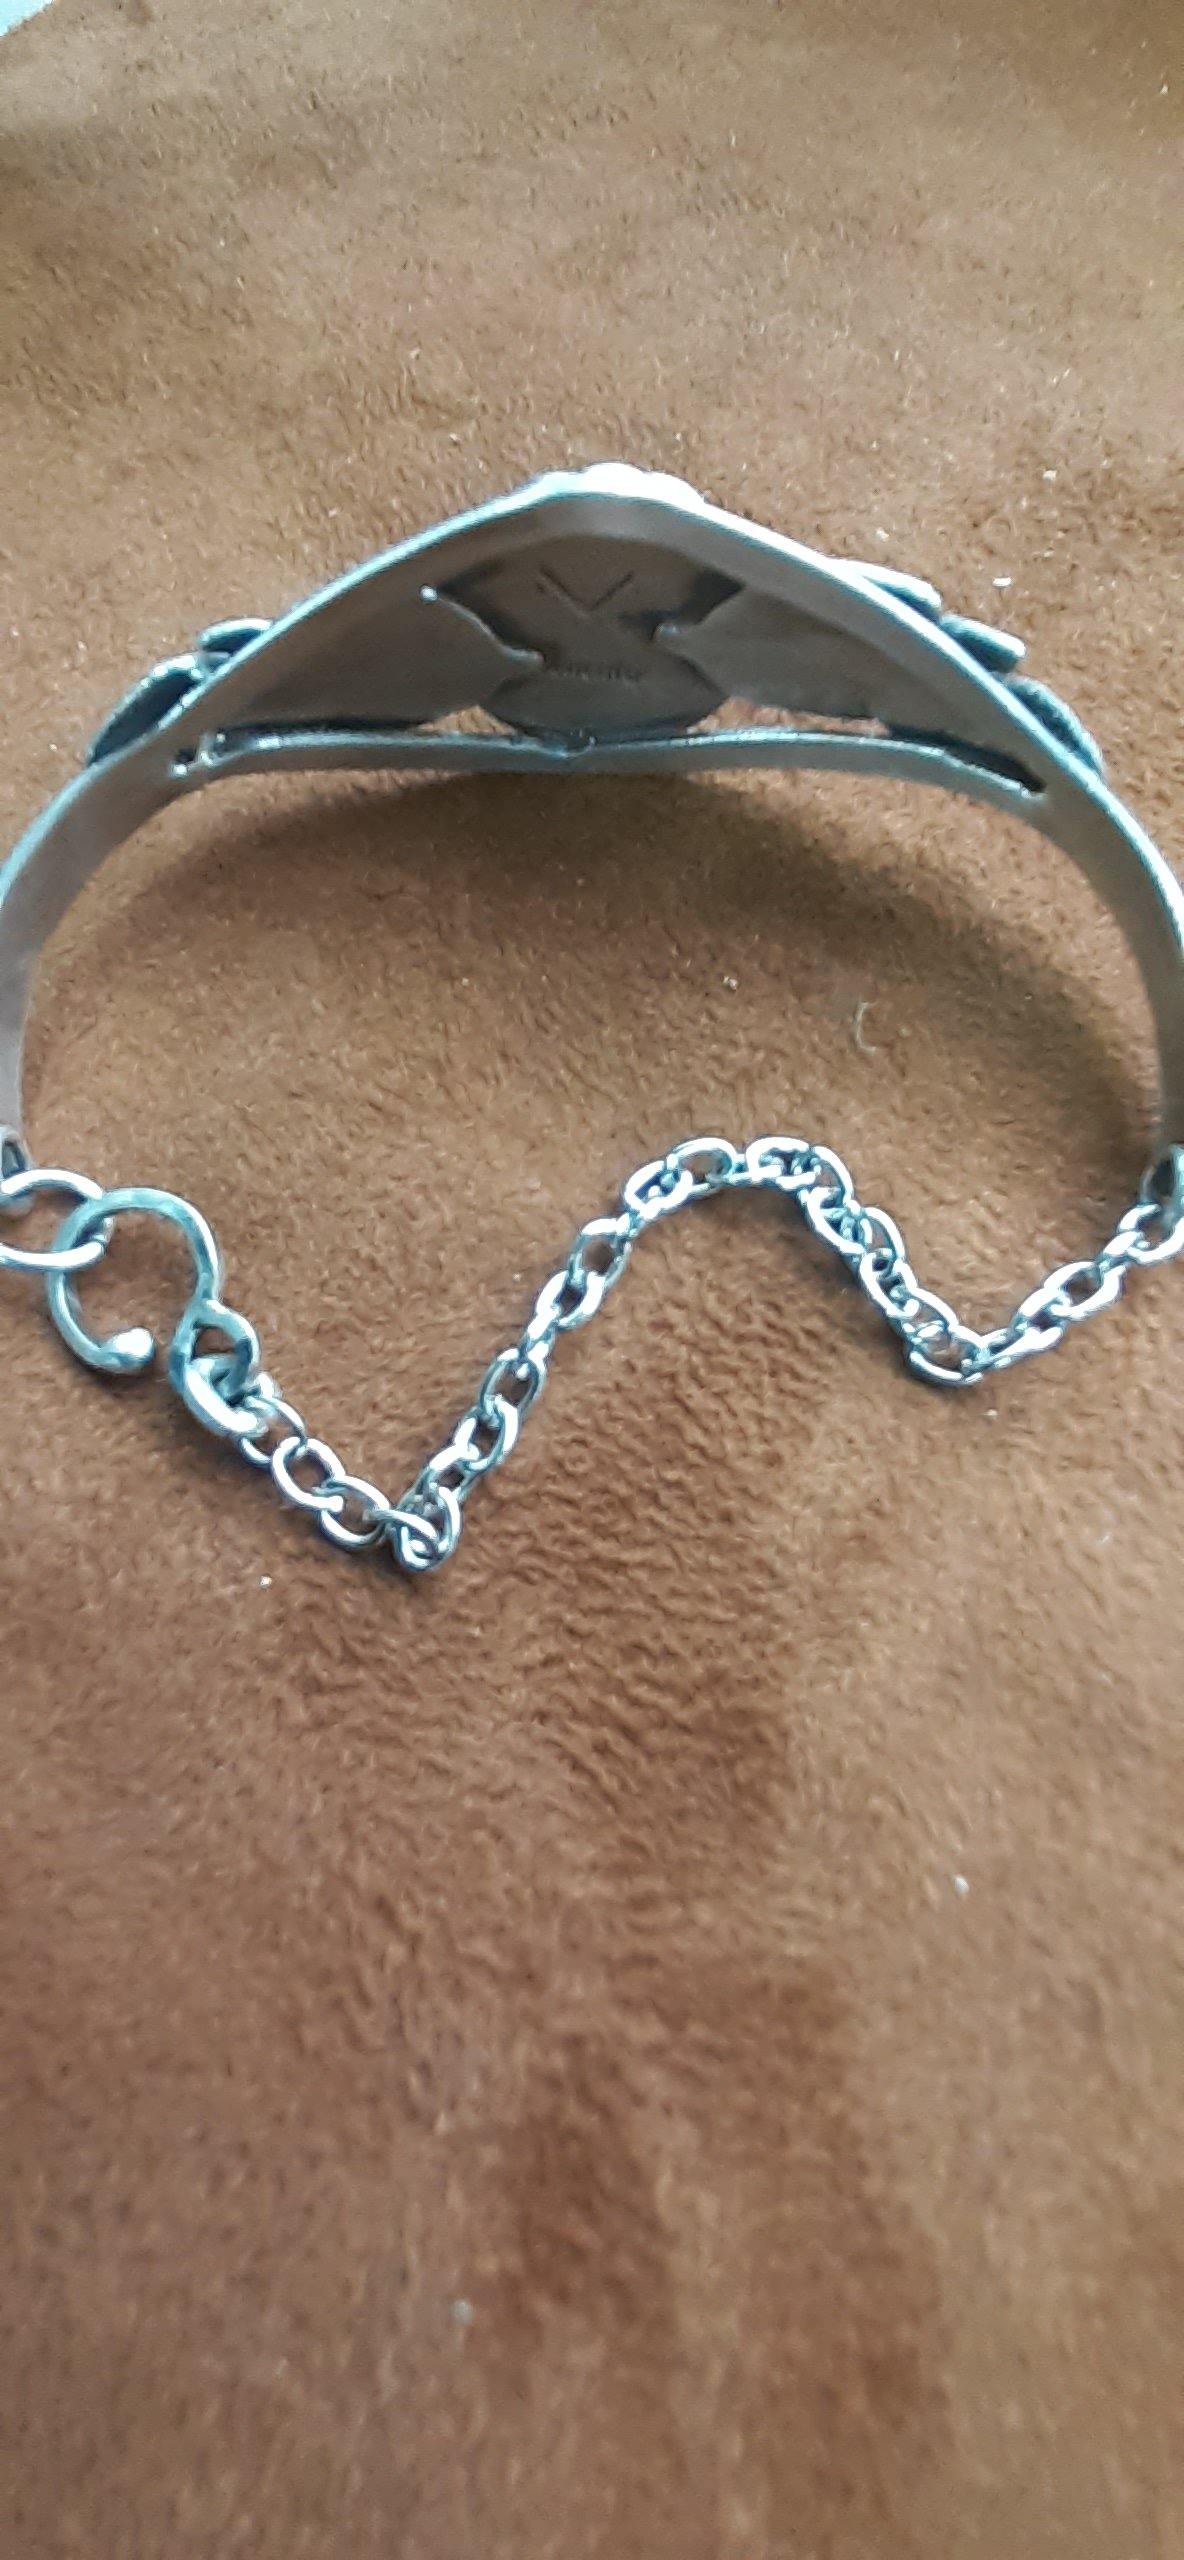 Turquoise and Sterling Silver Bracelet - WarmRainyDay